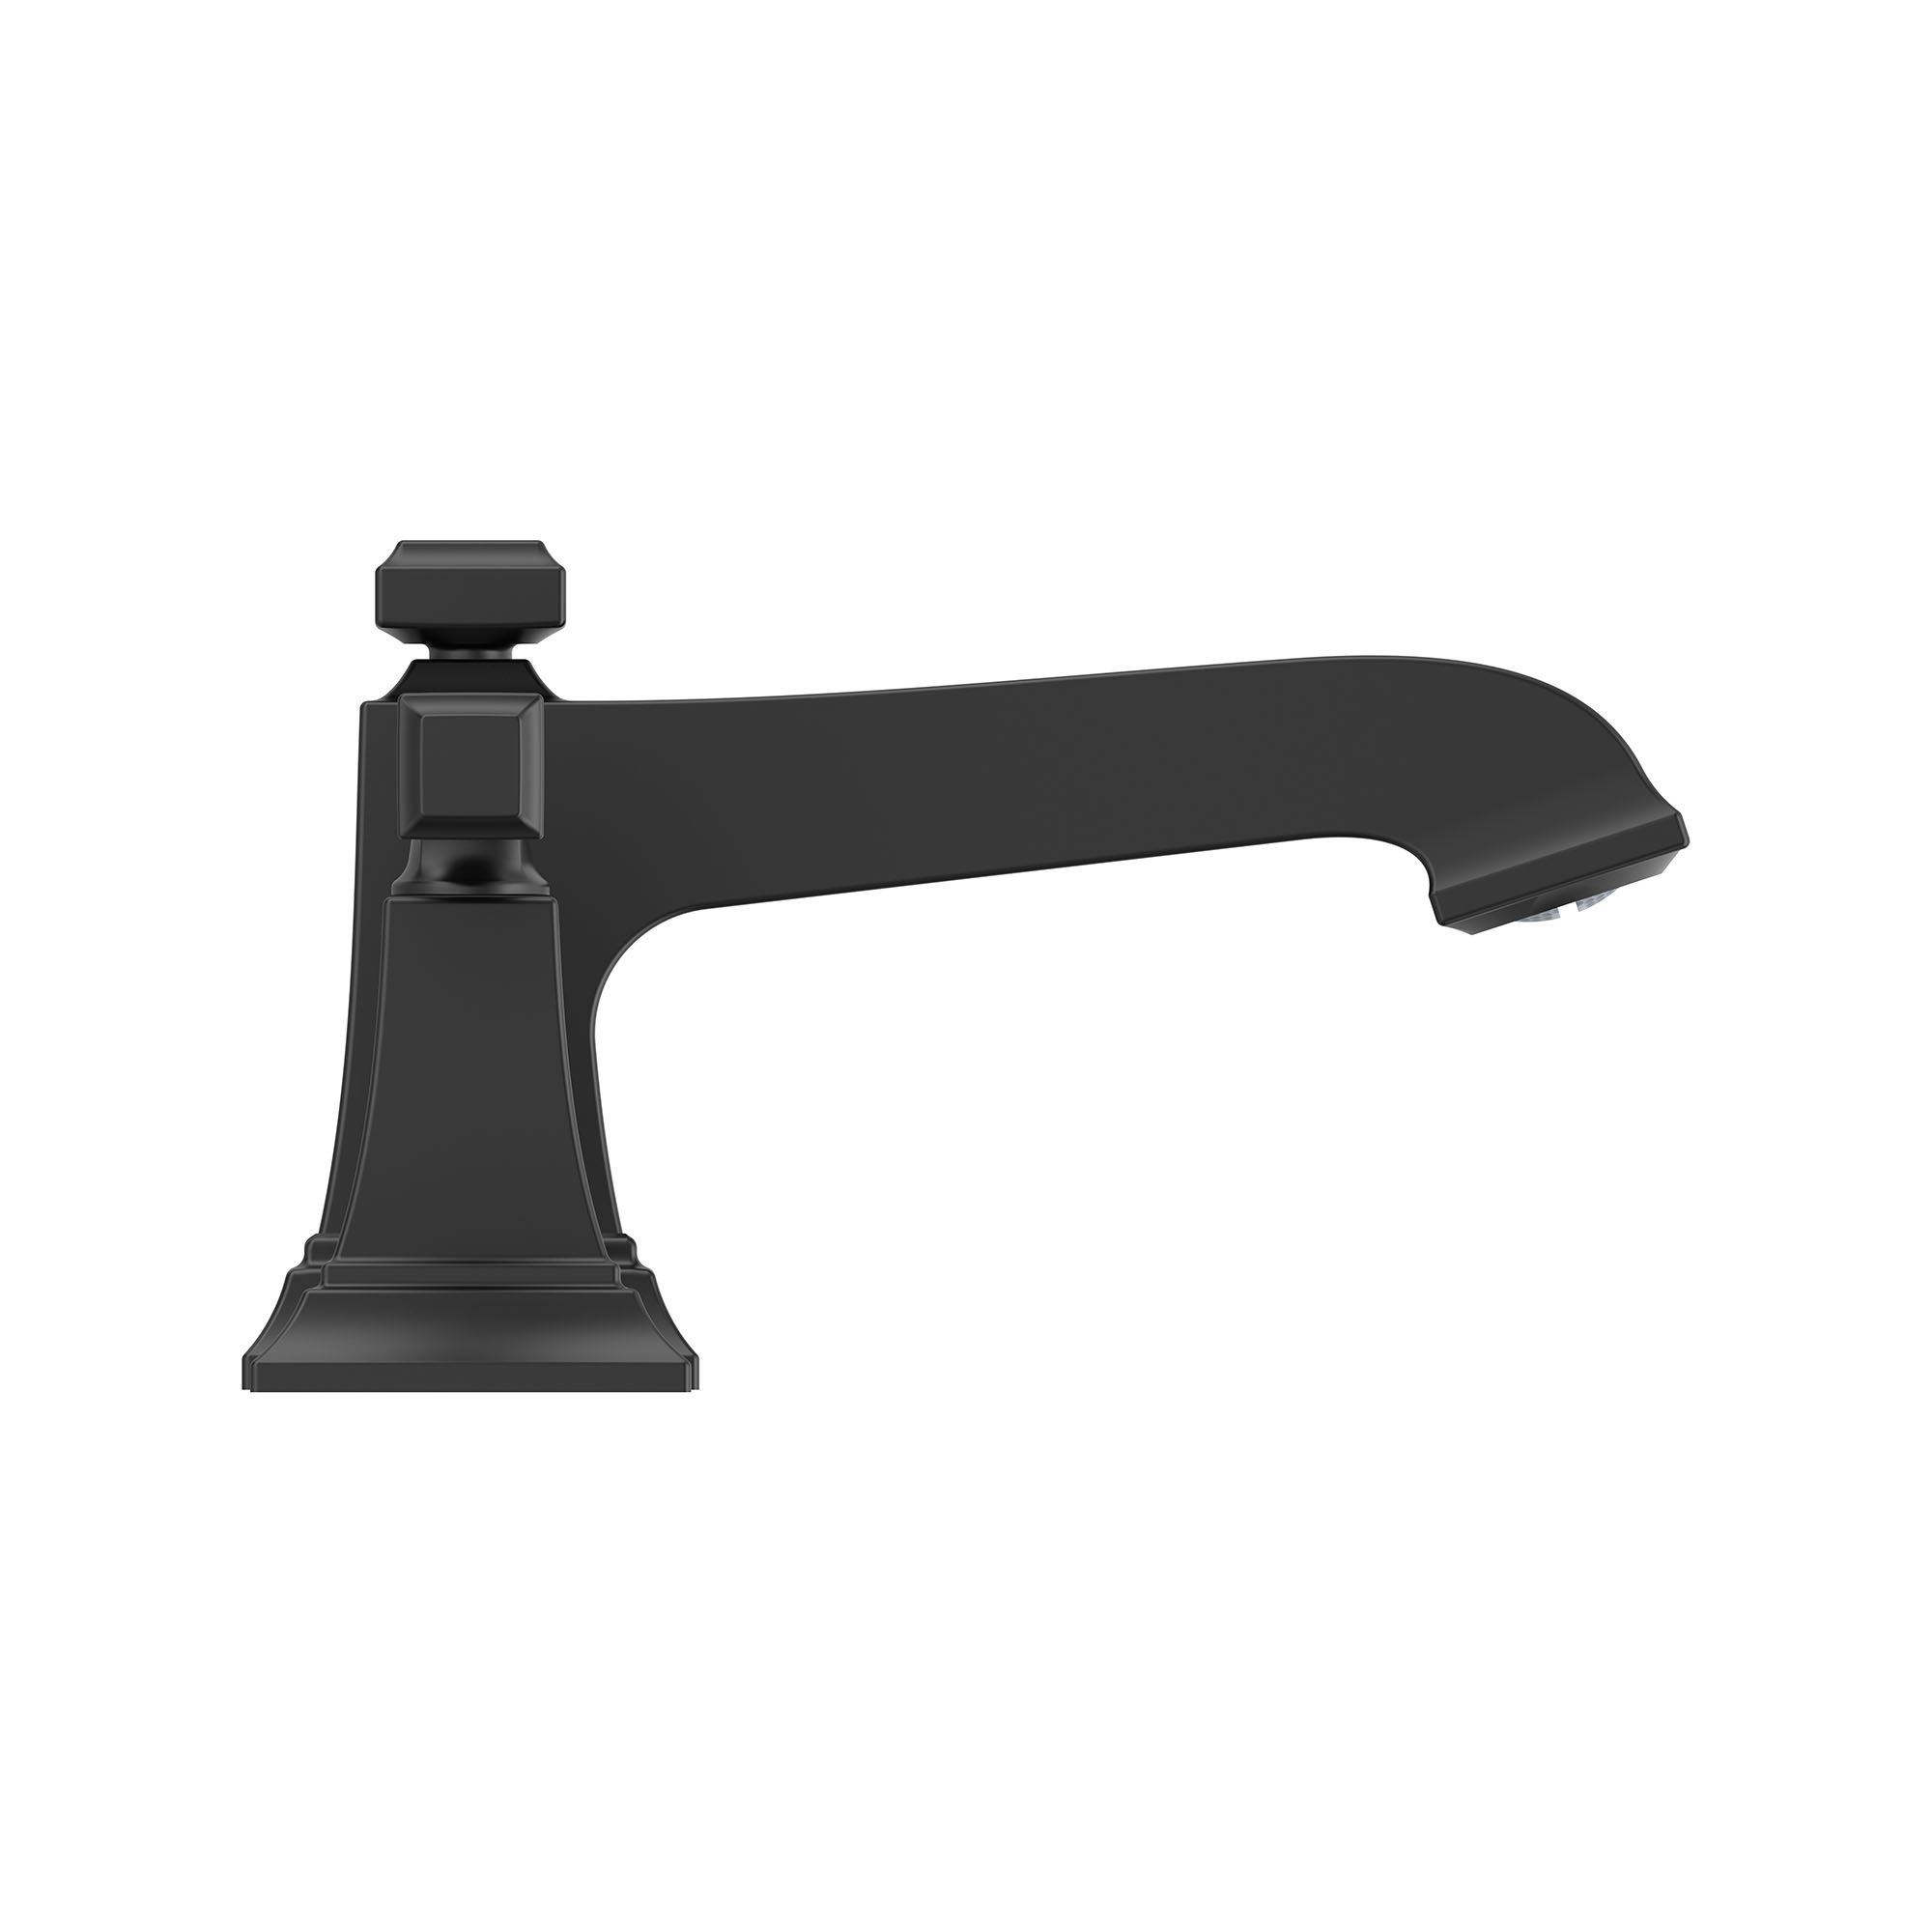 Town Square® S 8-Inch Widespread 2-Handle Bathroom Faucet 1.2 gpm/4.5 L/min With Lever Handles